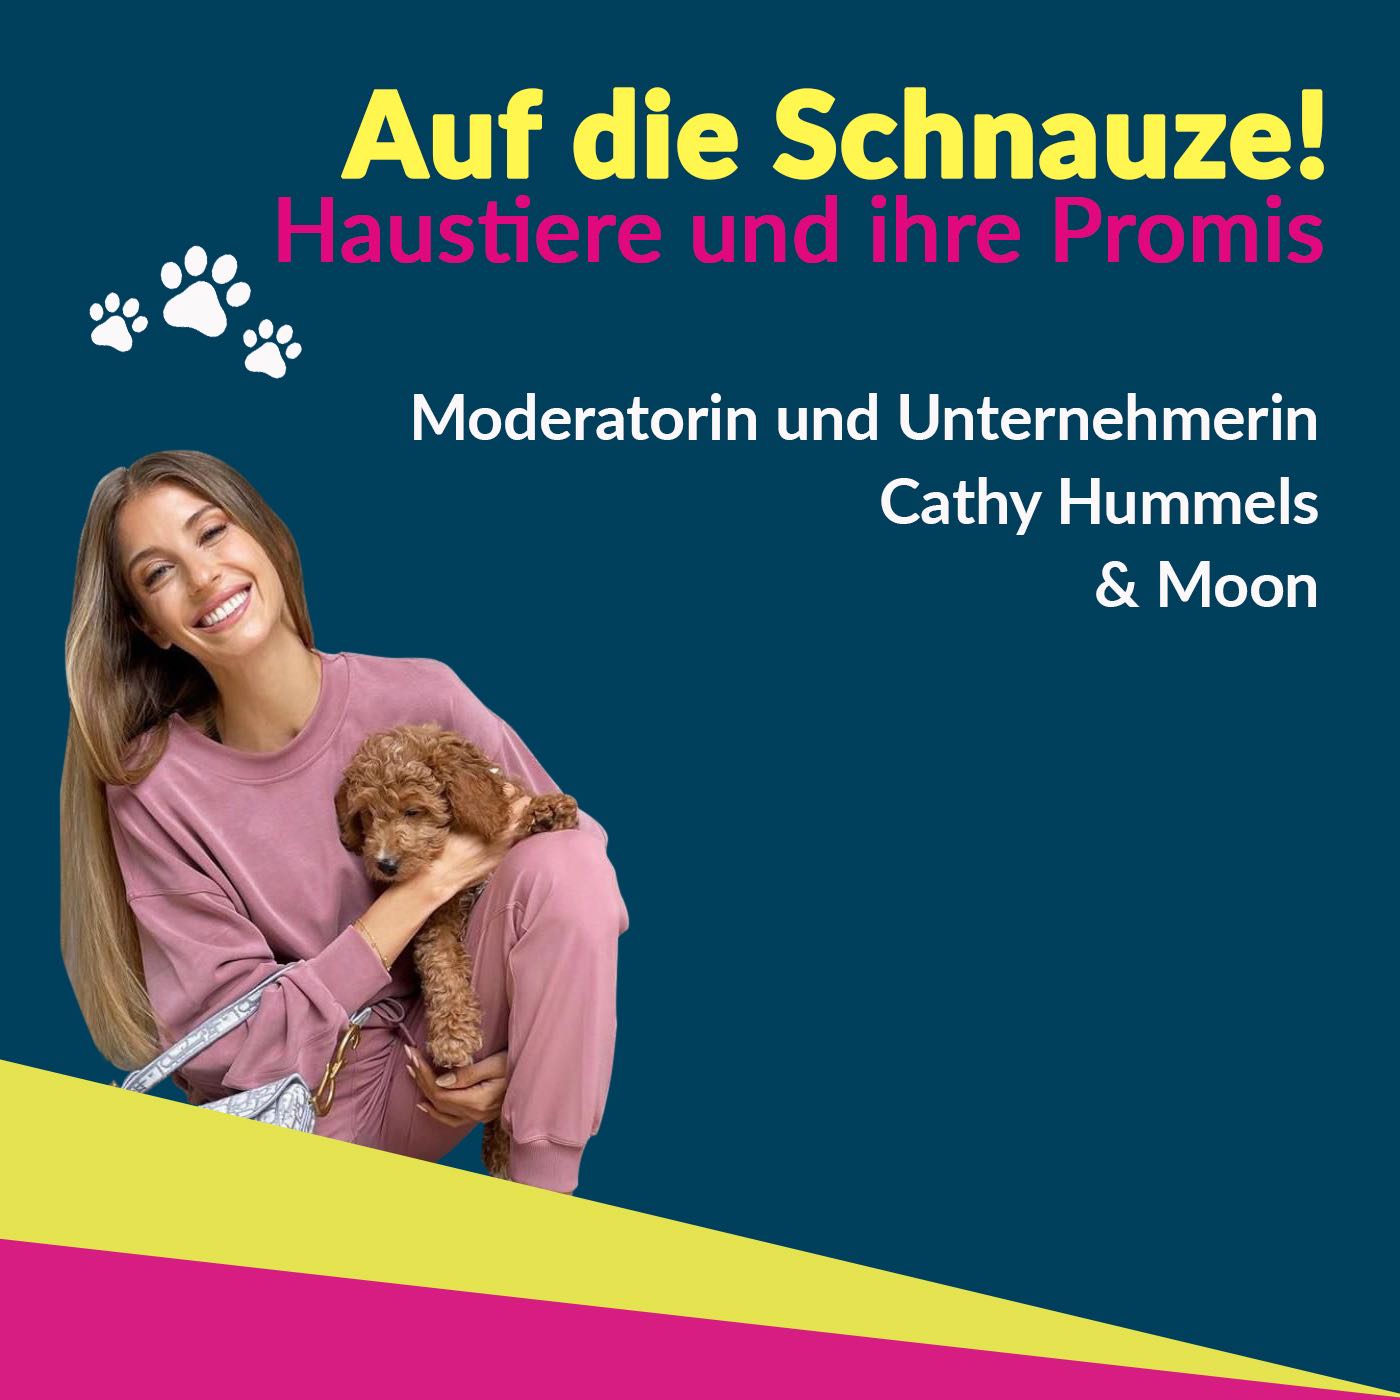 Cathy Hummels - dog-love to the moon and back!